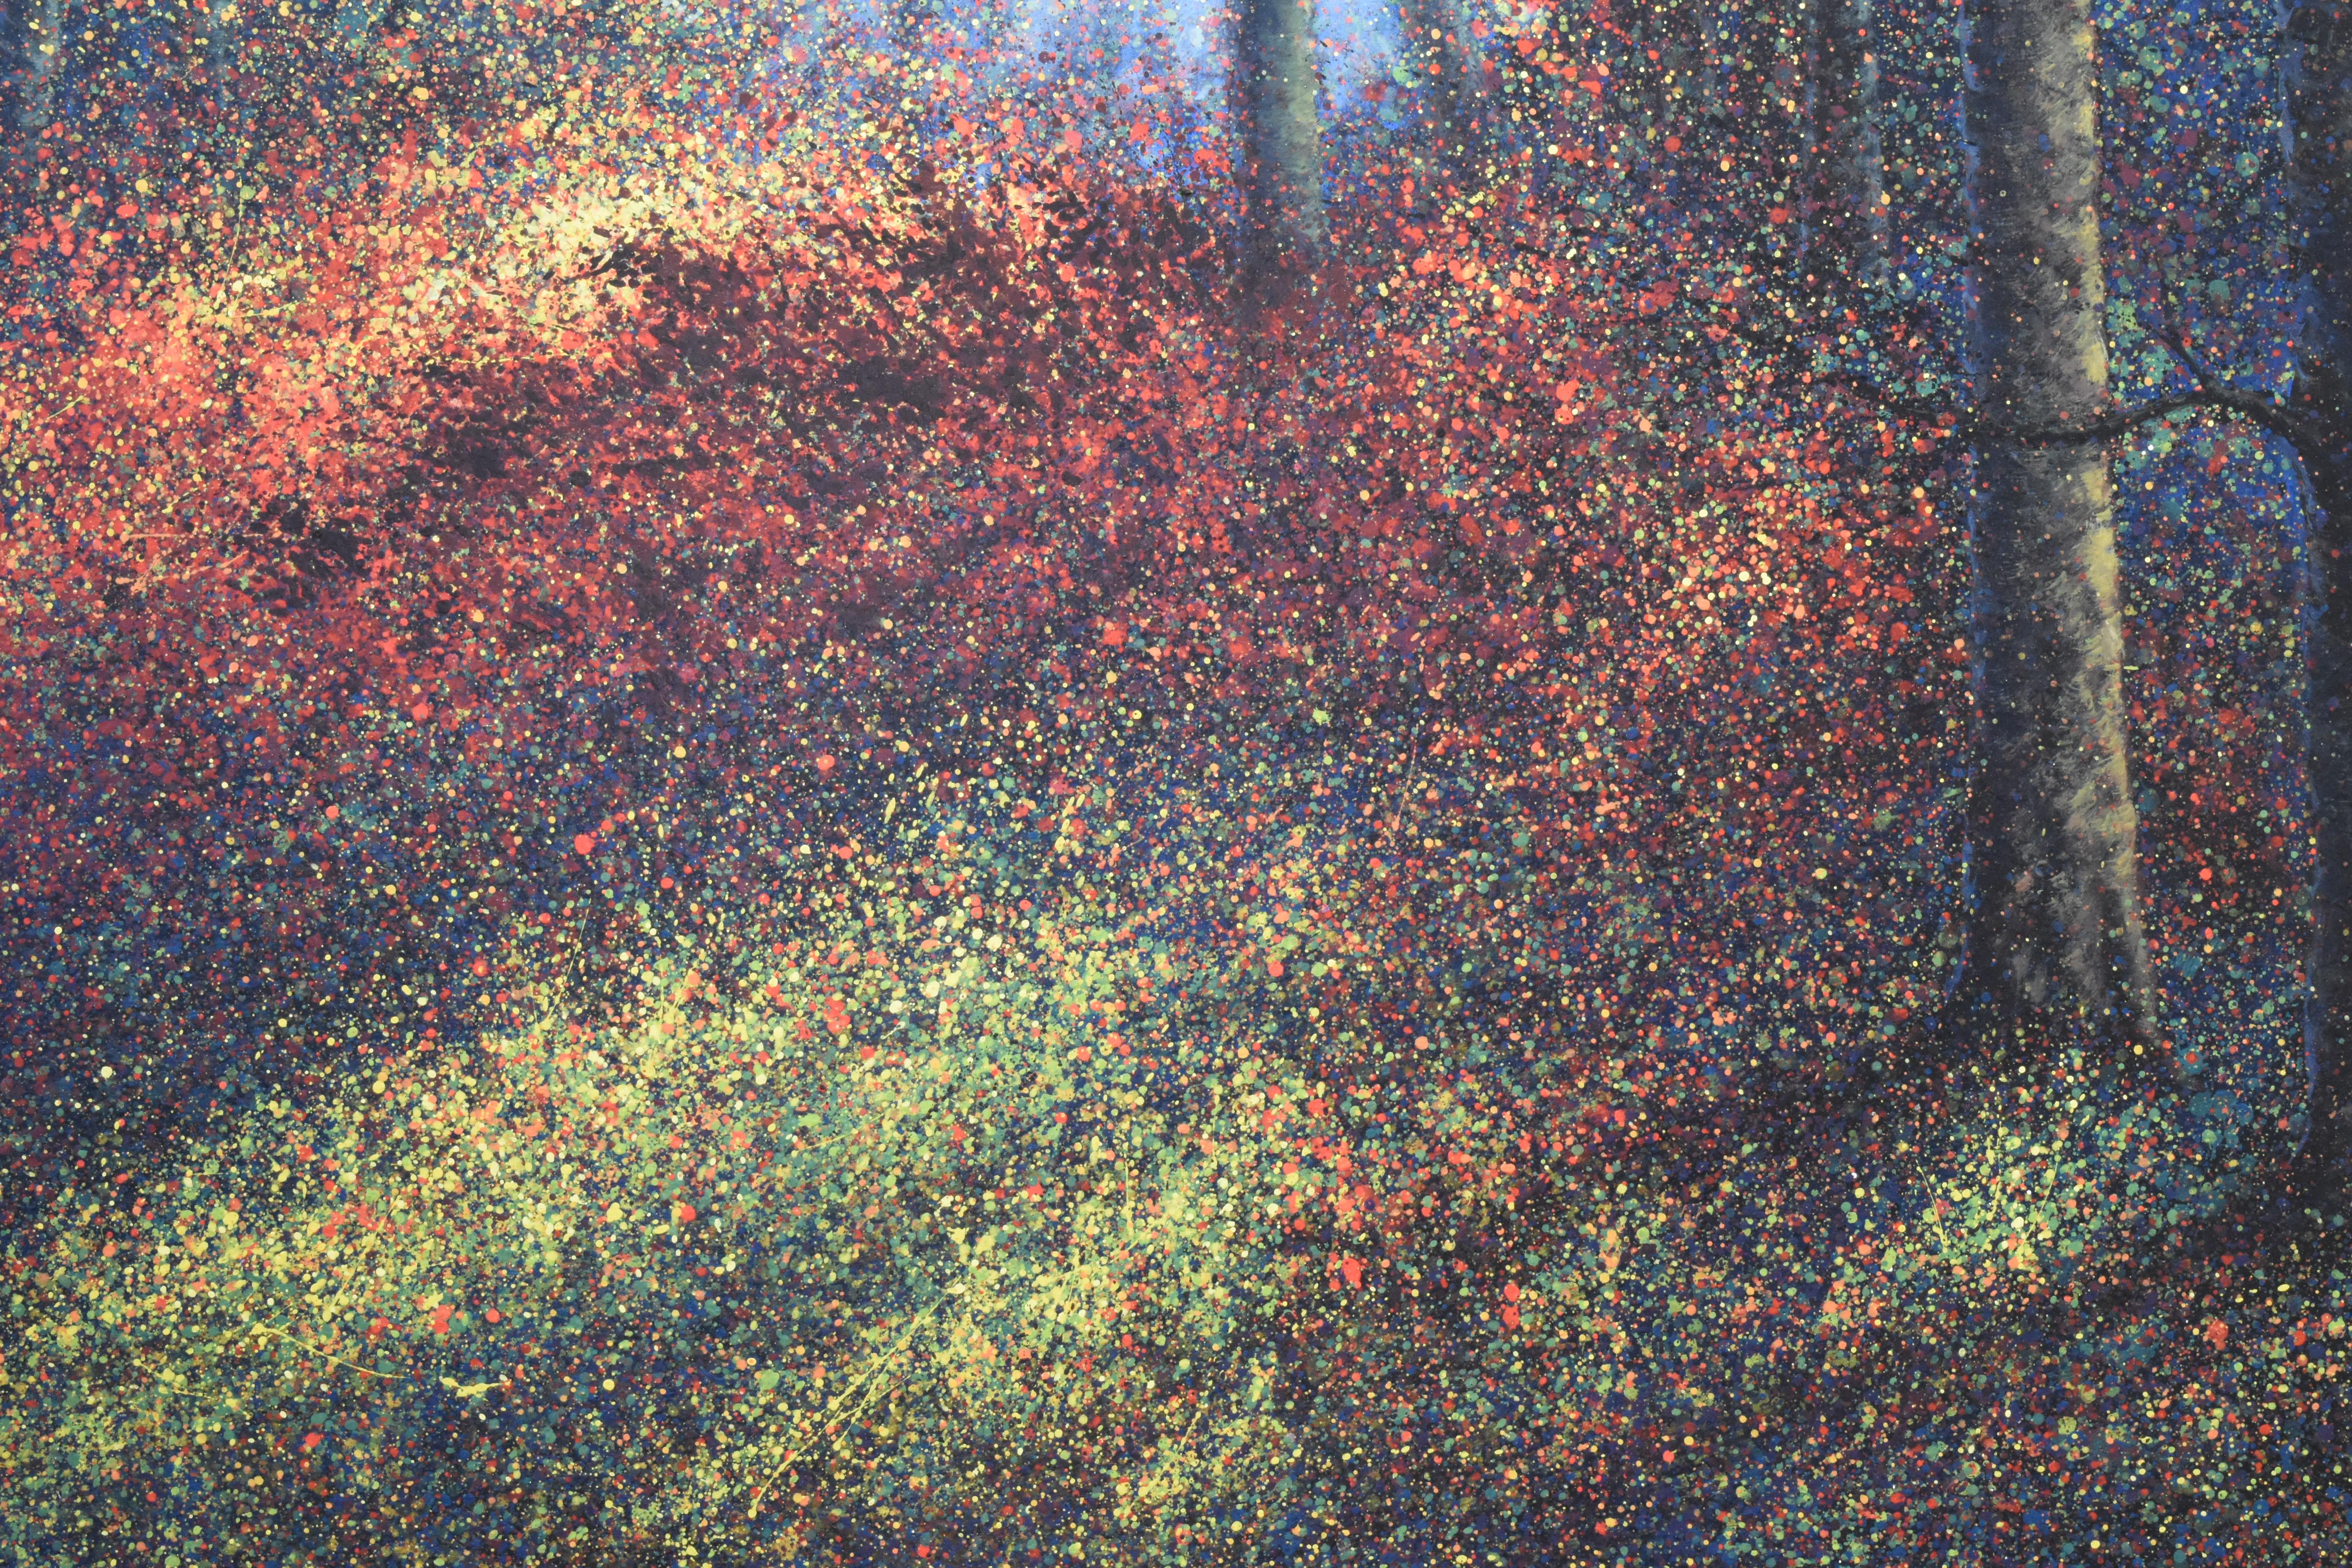 Vitality growing in the forest - Pointillism tLandscape by the Thailand artist - Painting by Narate Kathong